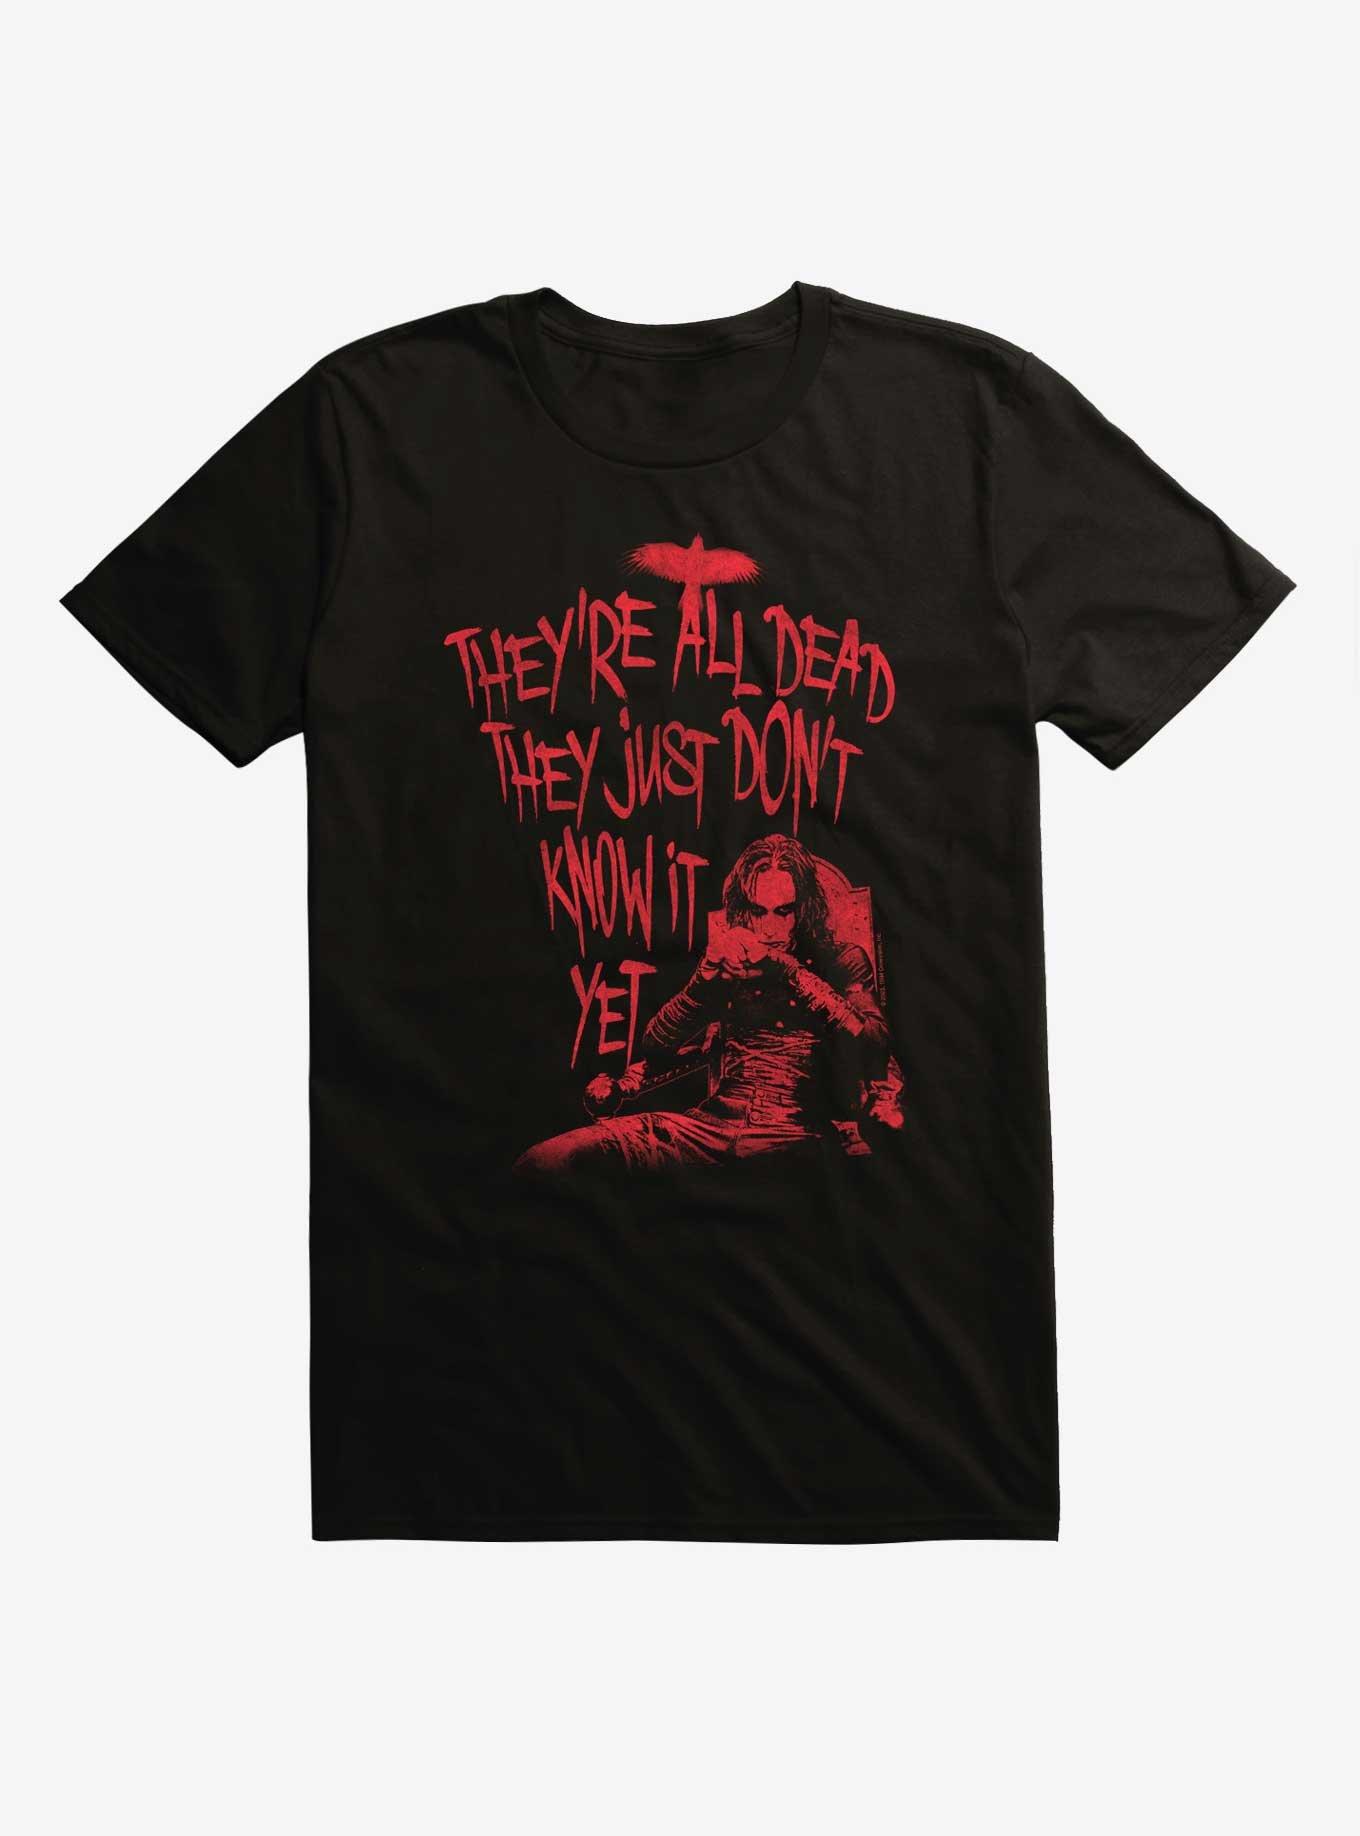 The Crow They Just Don't Know It Yet T-Shirt, BLACK, hi-res